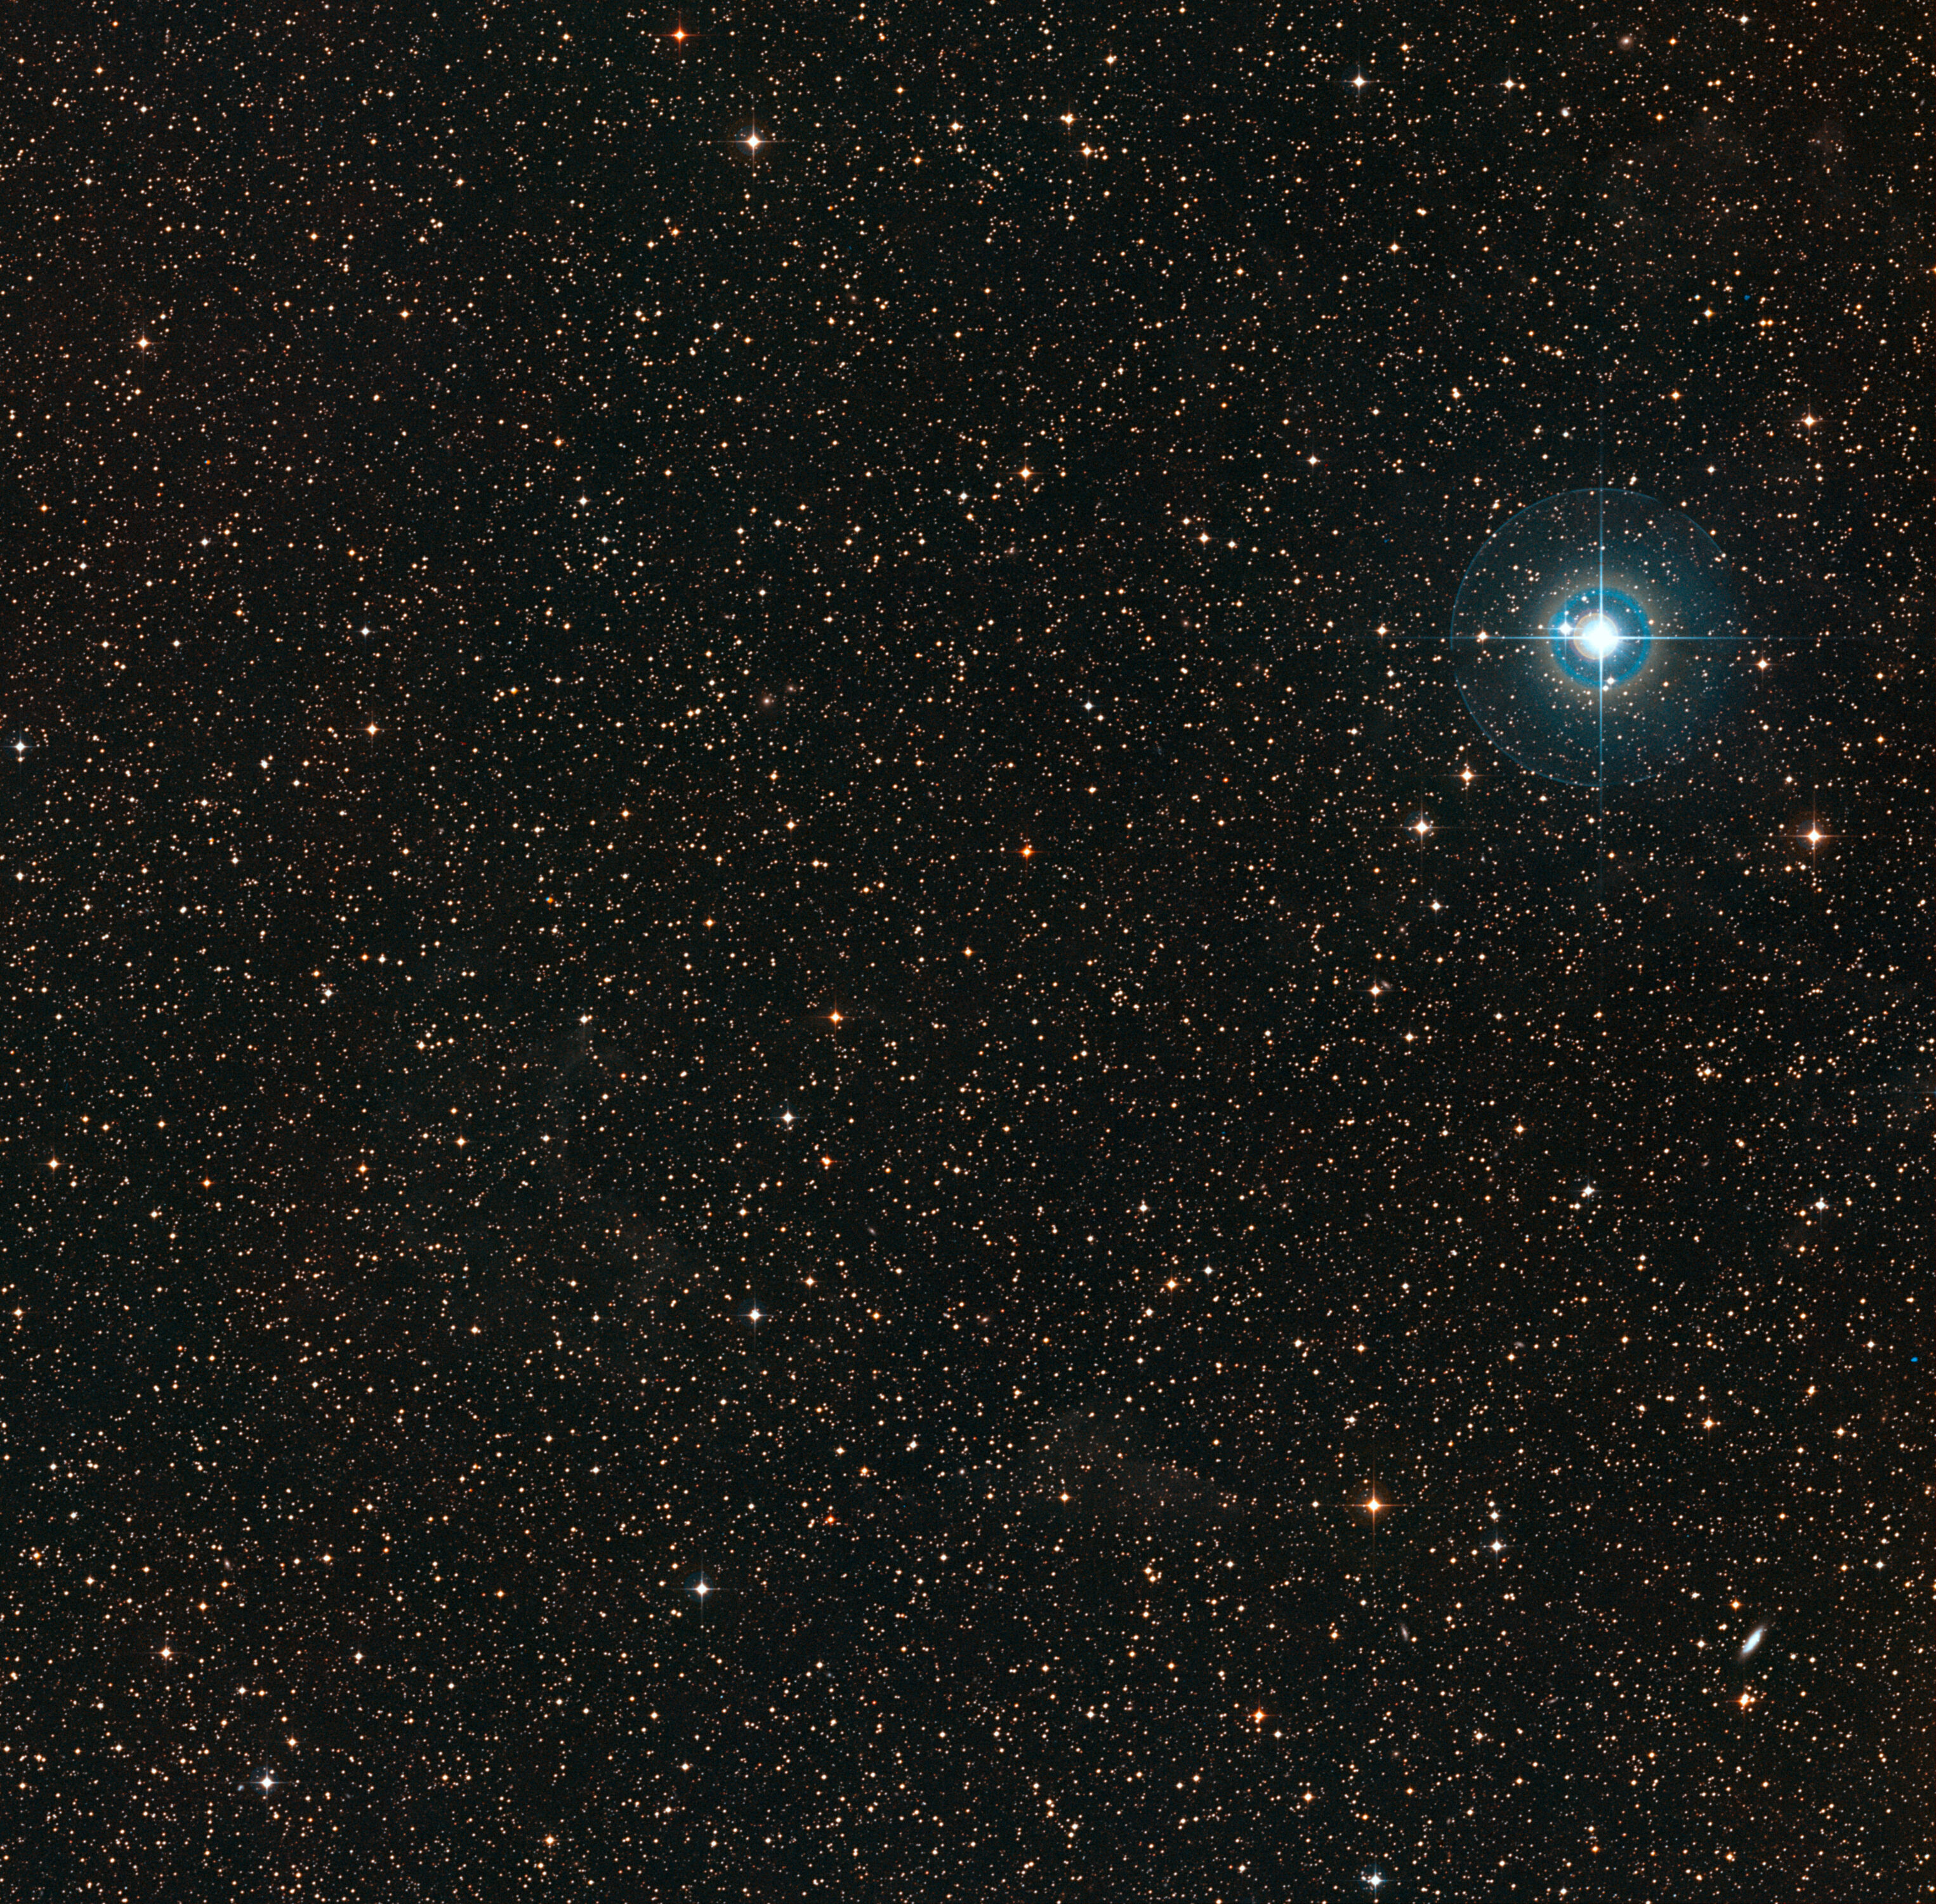 This colourful image shows the sky around the faint orange dwarf star PDS 70 (in the middle of the image). The bright blue star to the right is χ Centauri. Credit: ESO/Digitized Sky Survey 2. Acknowledgement: Davide De Martin